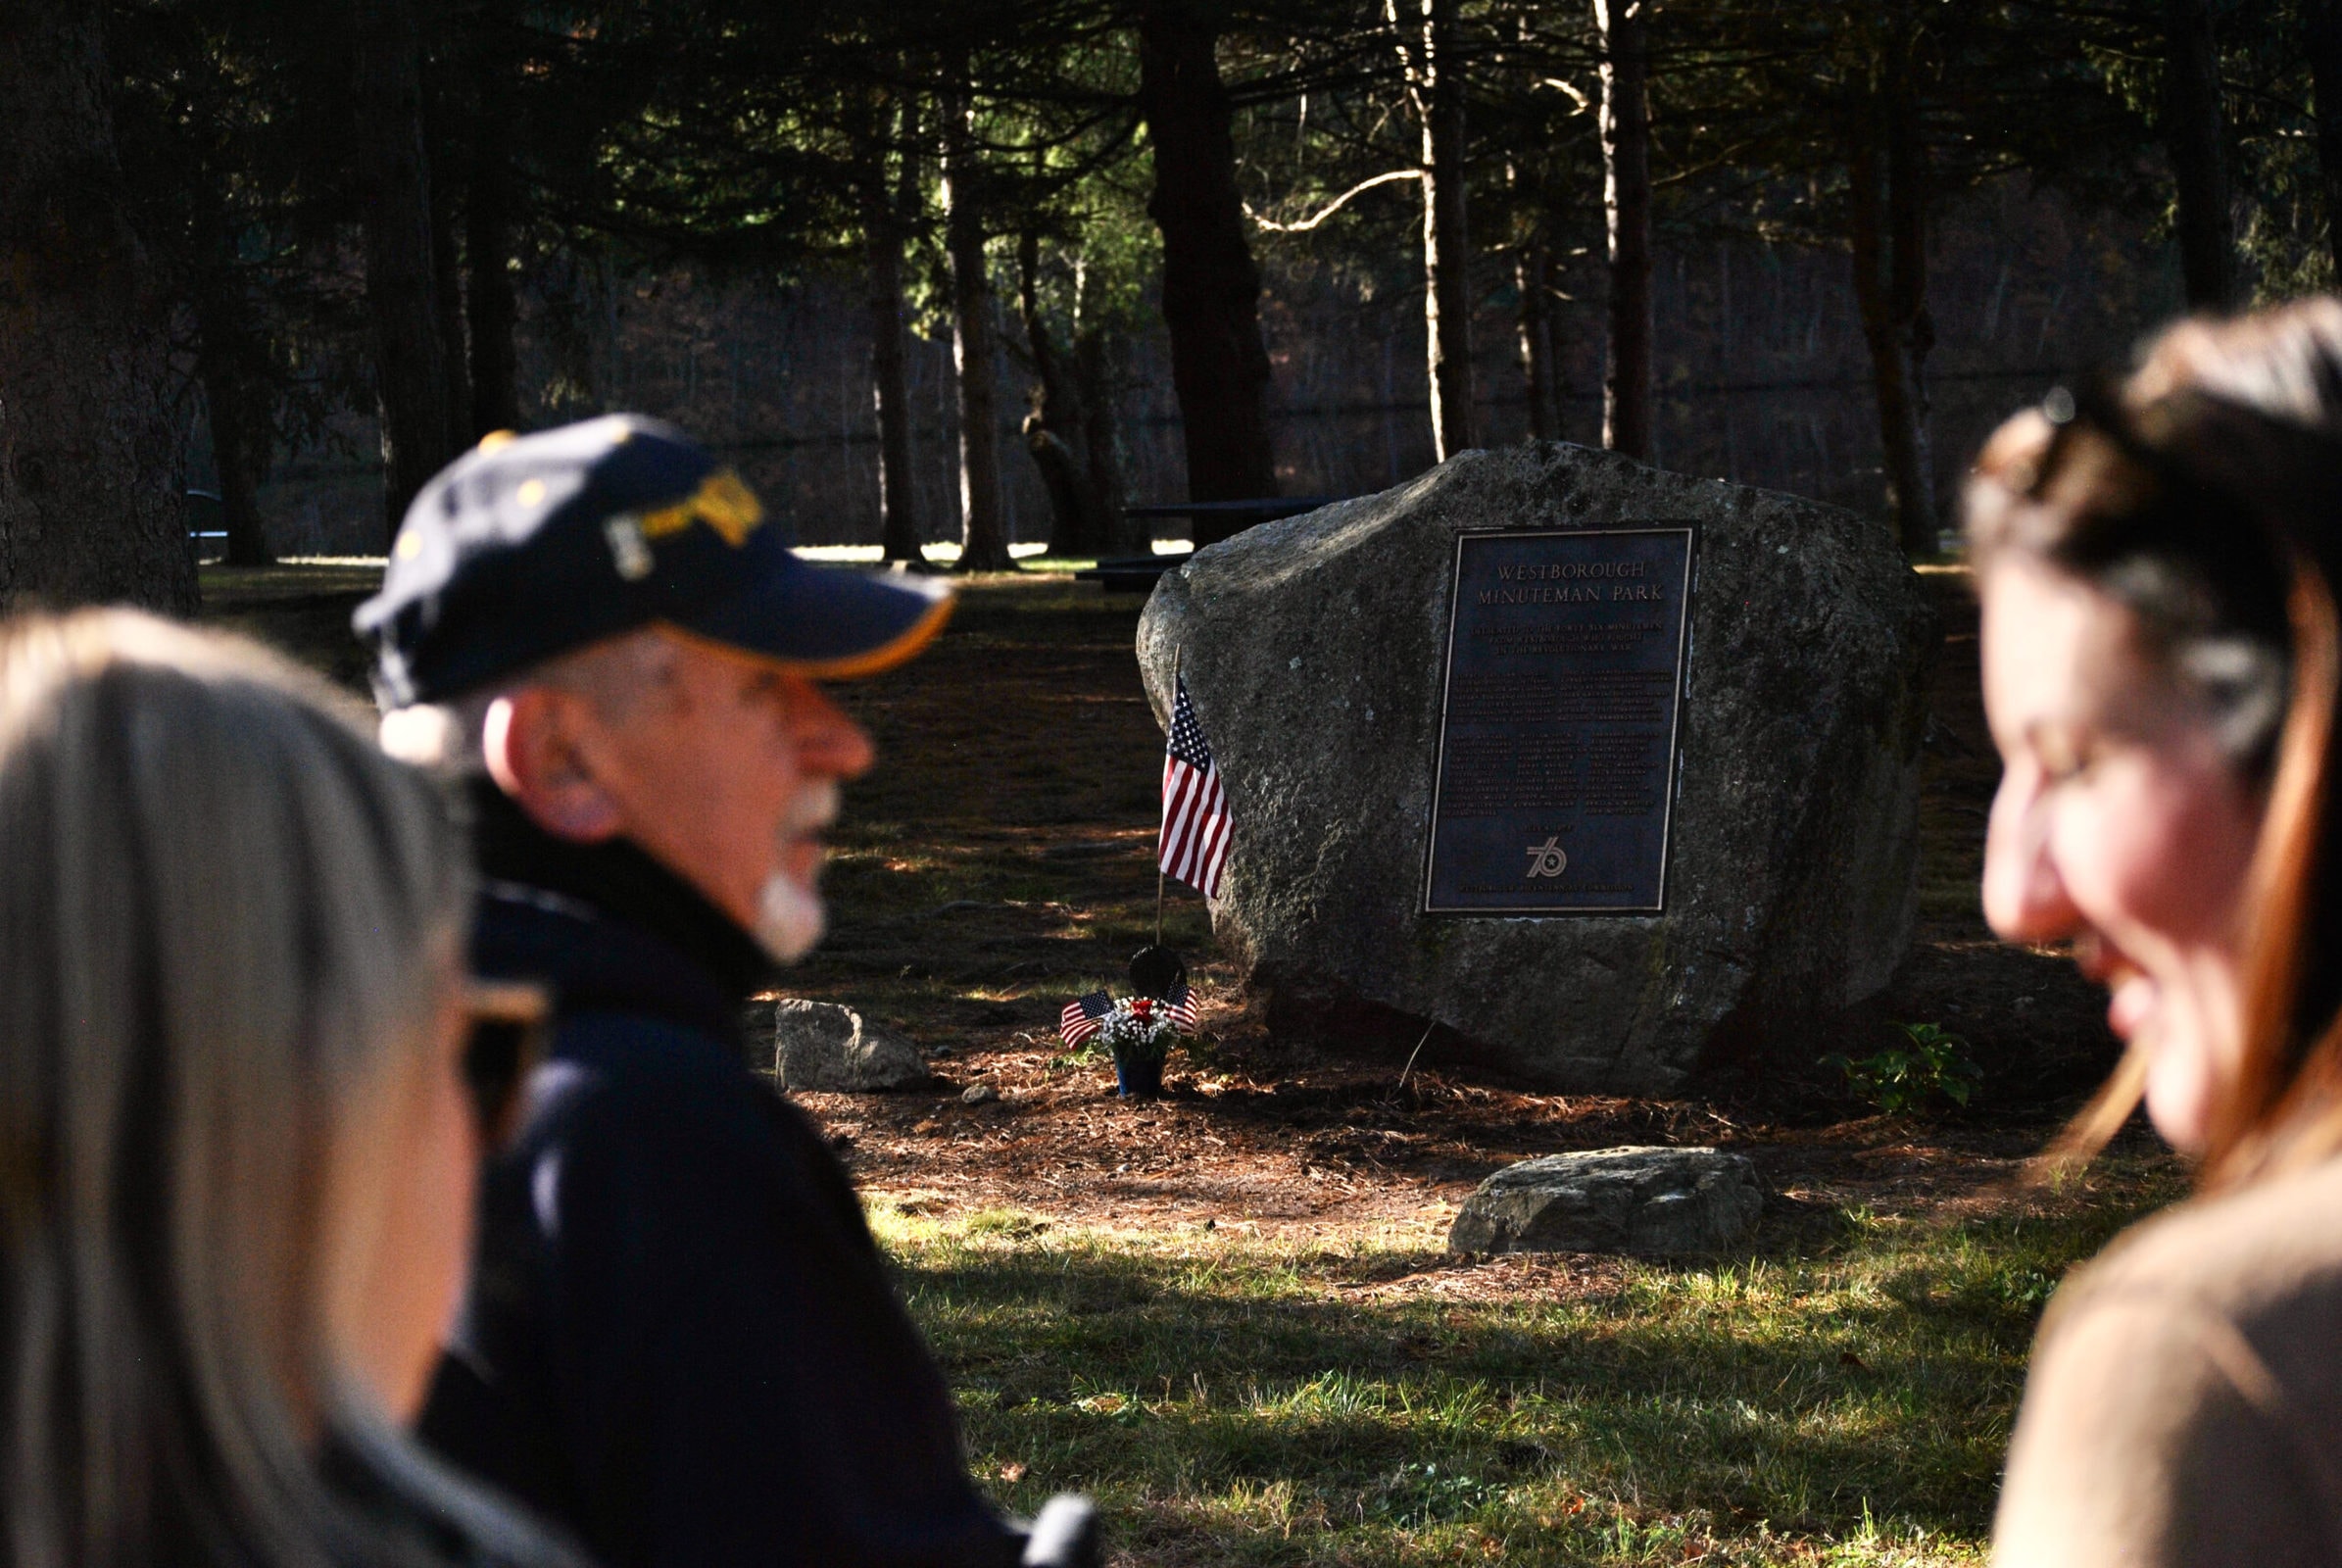 Westborough holds Veterans Day observances